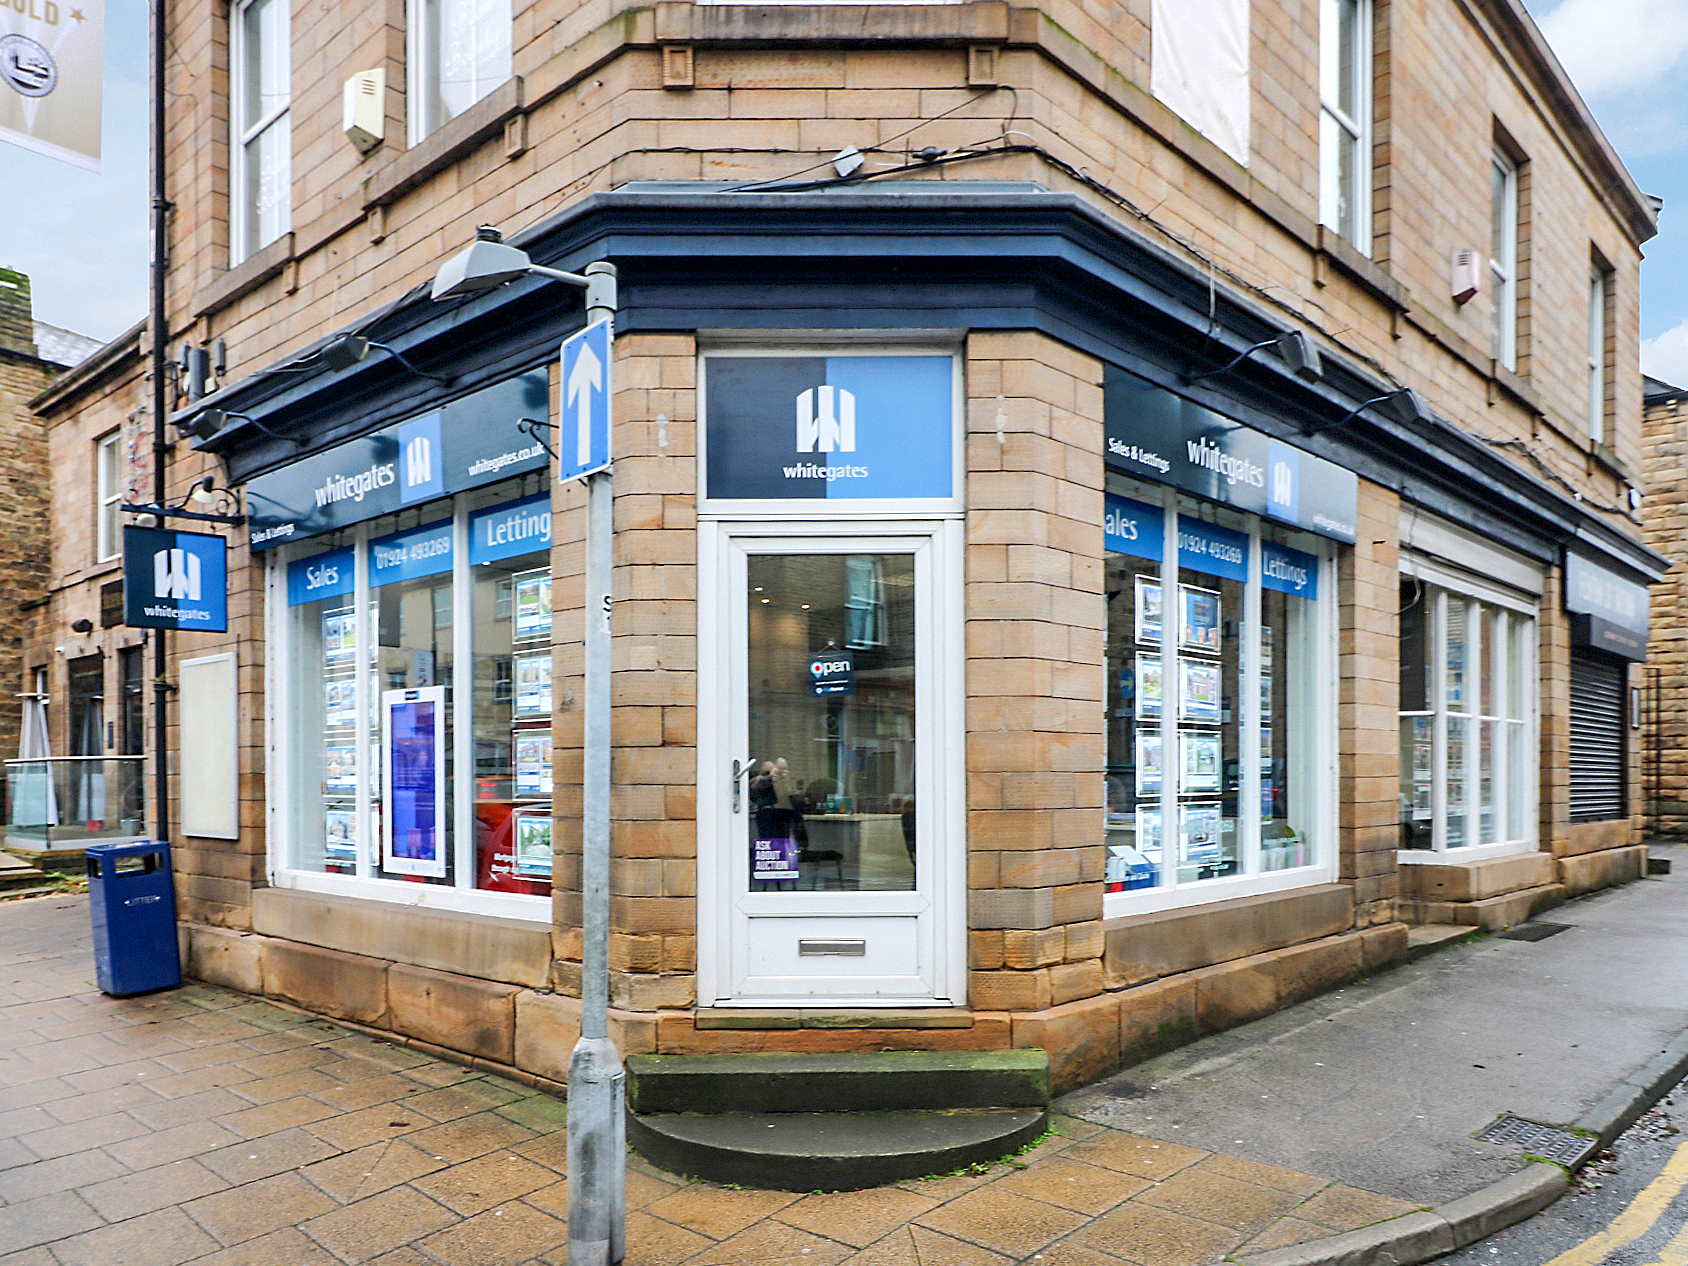 Whitegates Mirfield Lettings & Estate Agents - Mirfield, West Yorkshire WF14 8AB - 01924 493269 | ShowMeLocal.com